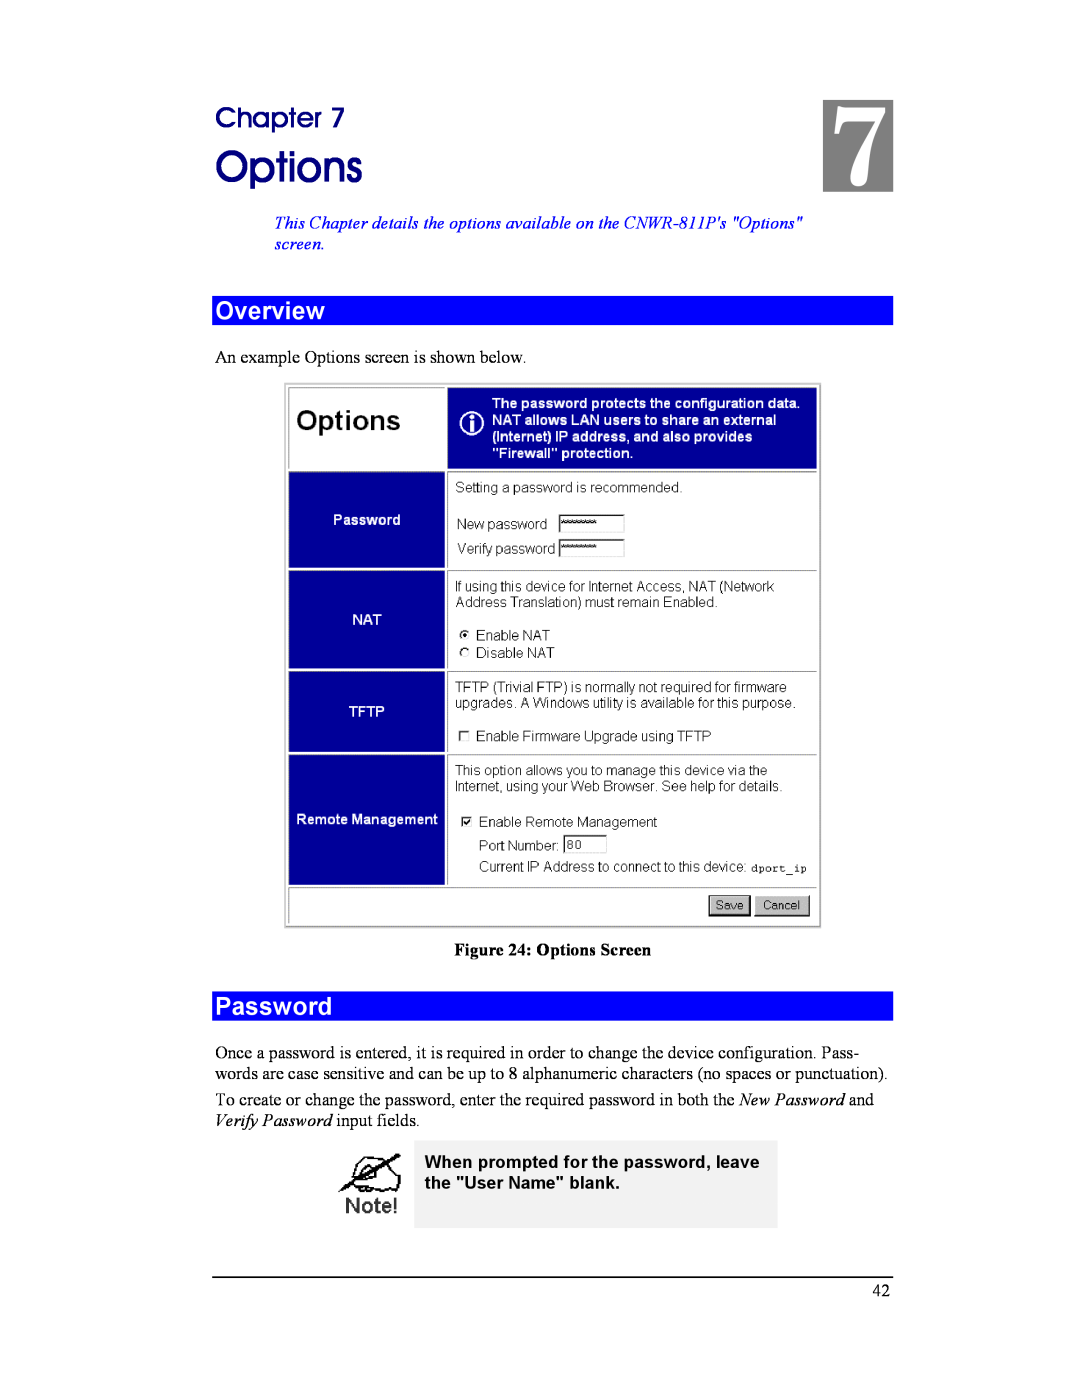 CNET CNWR-811P manual Options, Password, When prompted for the password, leave the User Name blank, Chapter, Overview 